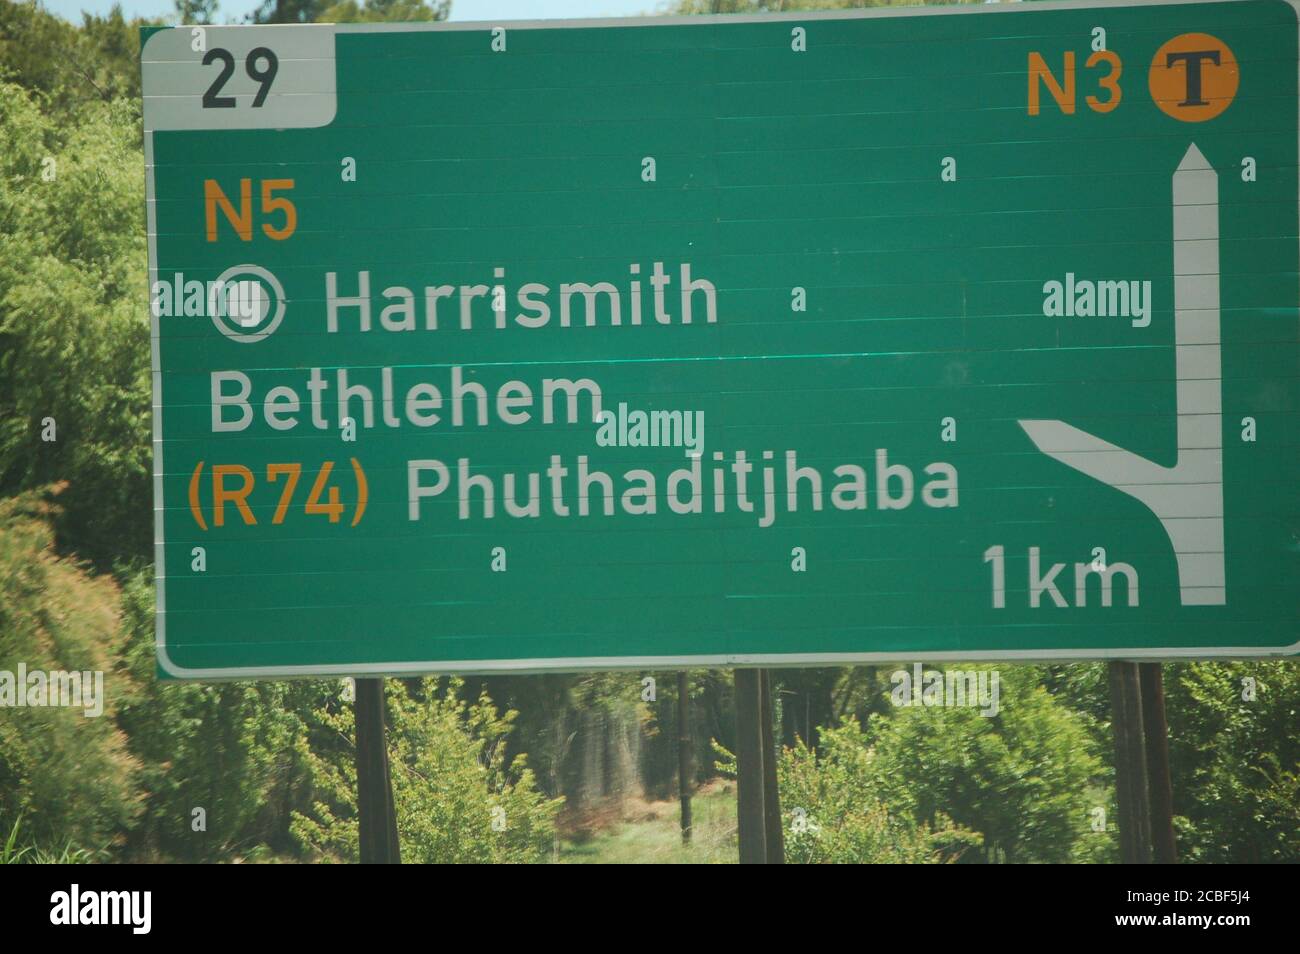 N3 / N5 Highway Sign in South Africa Stock Photo